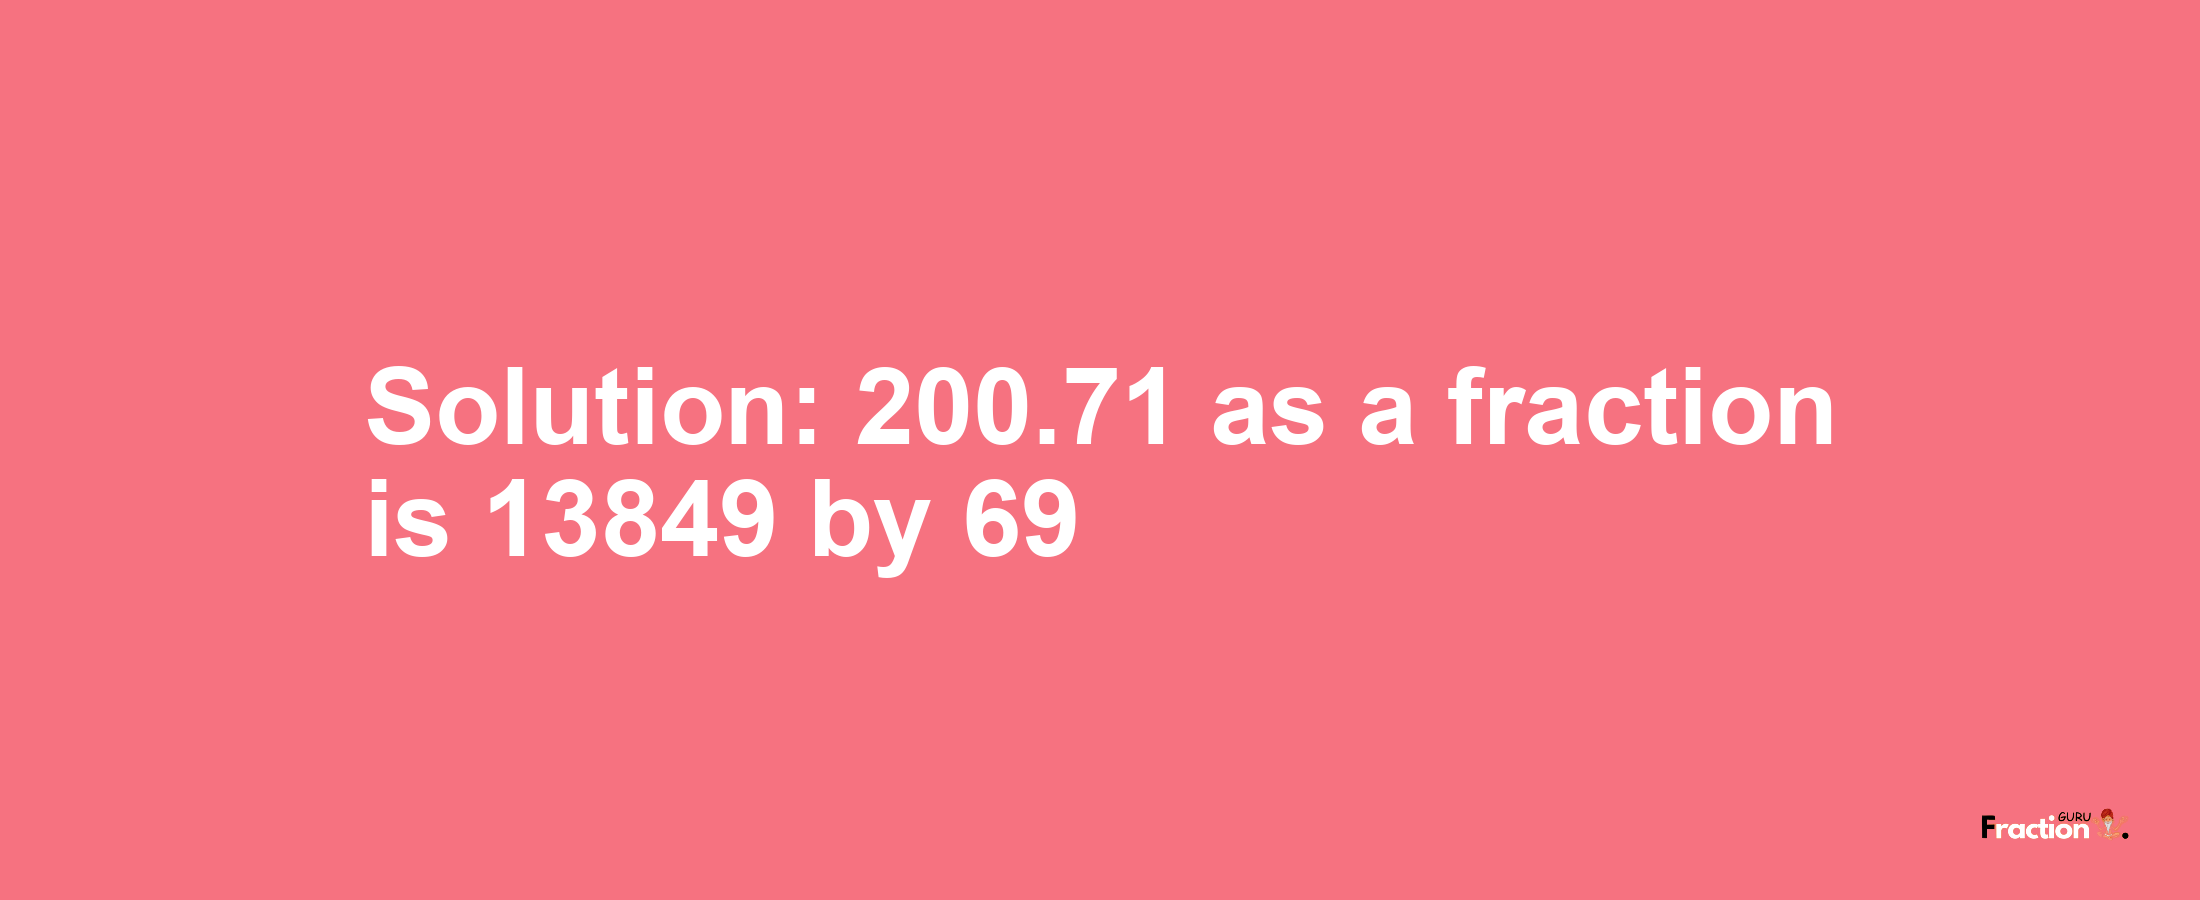 Solution:200.71 as a fraction is 13849/69